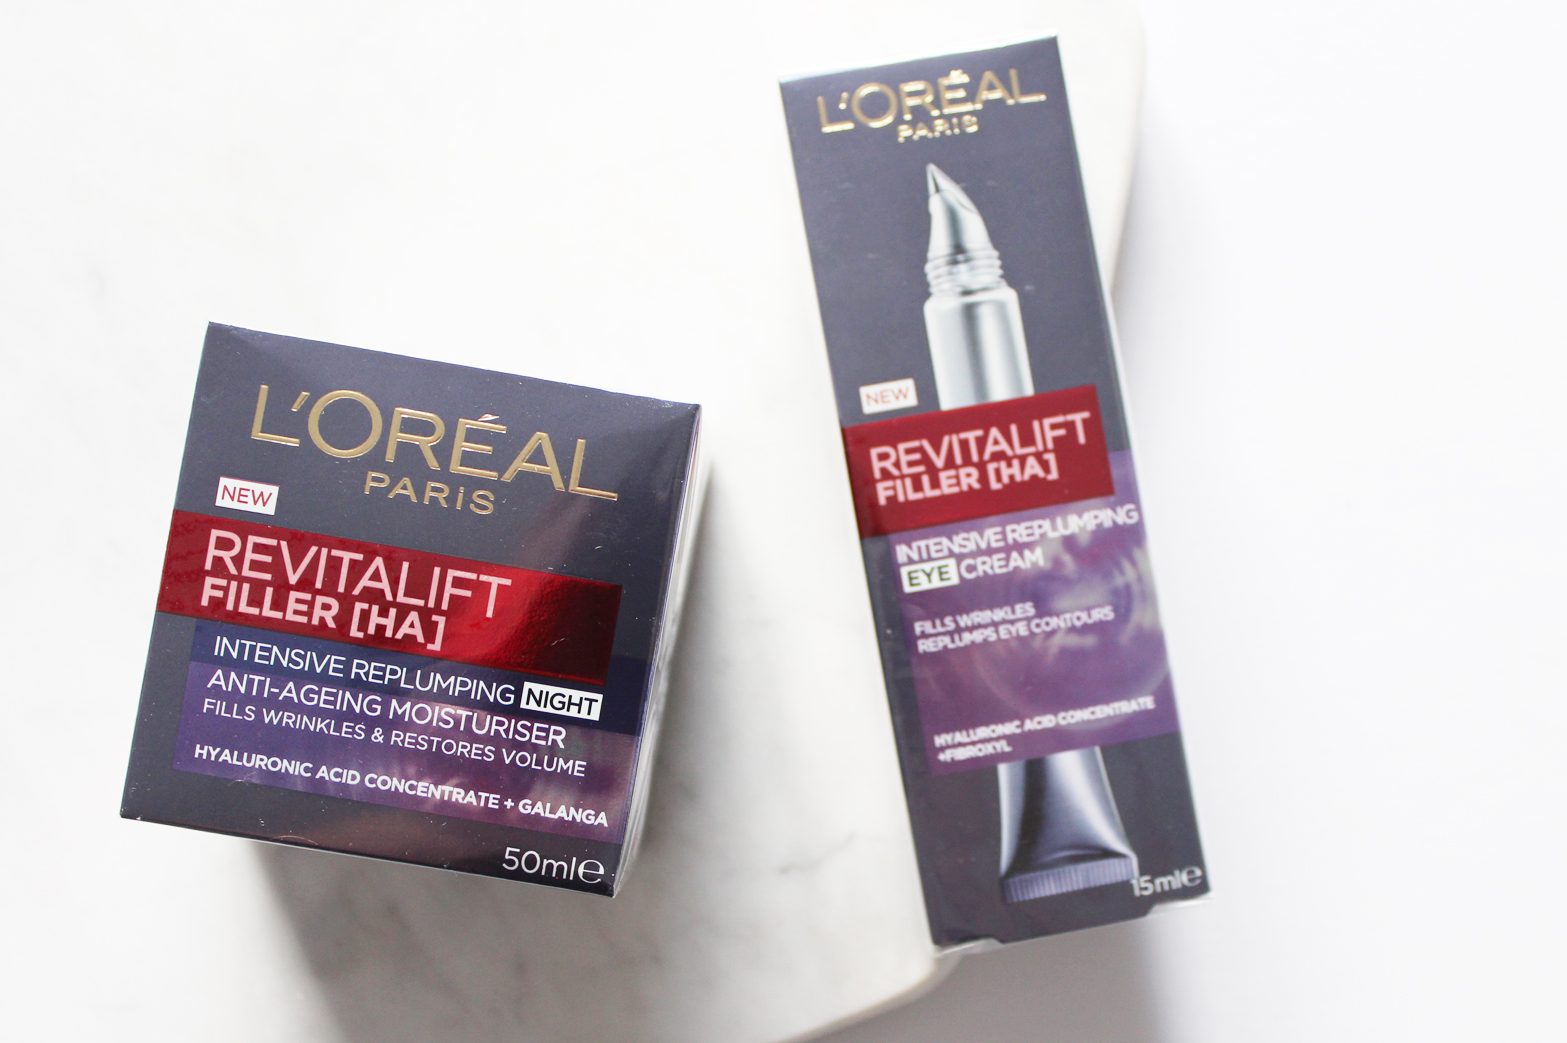 L'OREAL PARIS | New Product Launches for New Zealand June/July 2016 - CassandraMyee